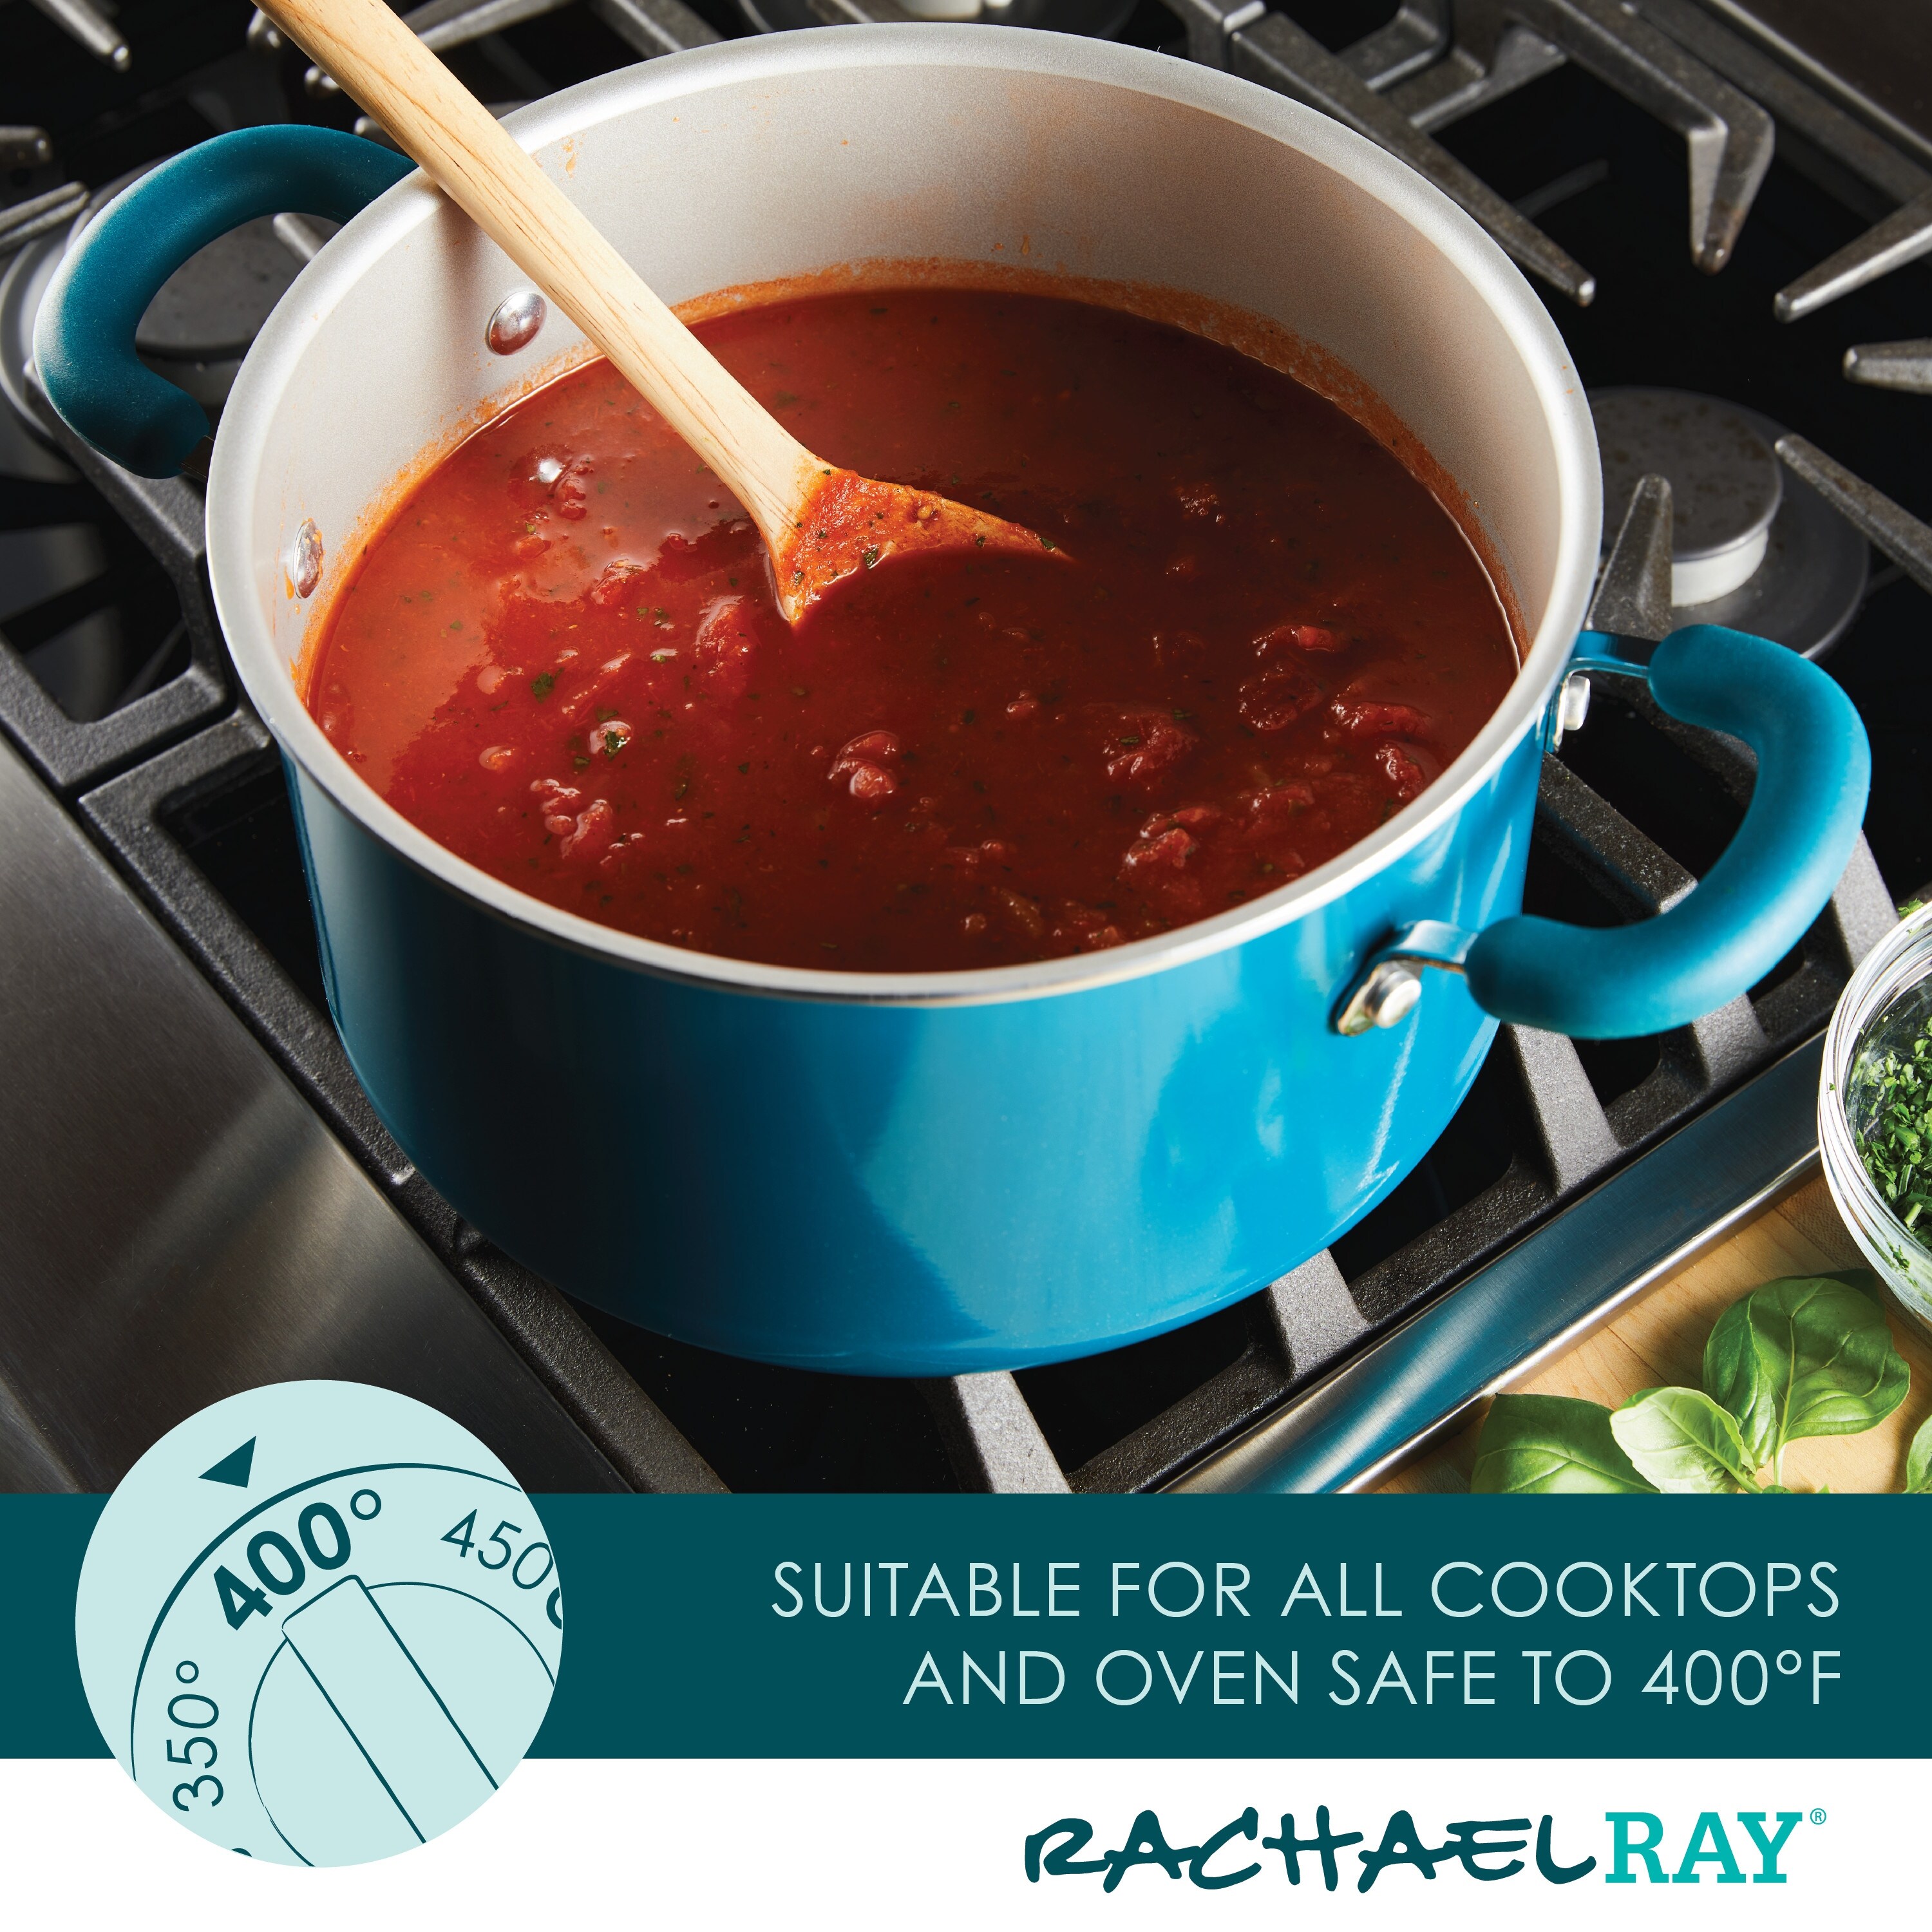 Rachael Ray 13-Piece Create Delicious Aluminum Nonstick Cookware Set, Teal  Shimmer 